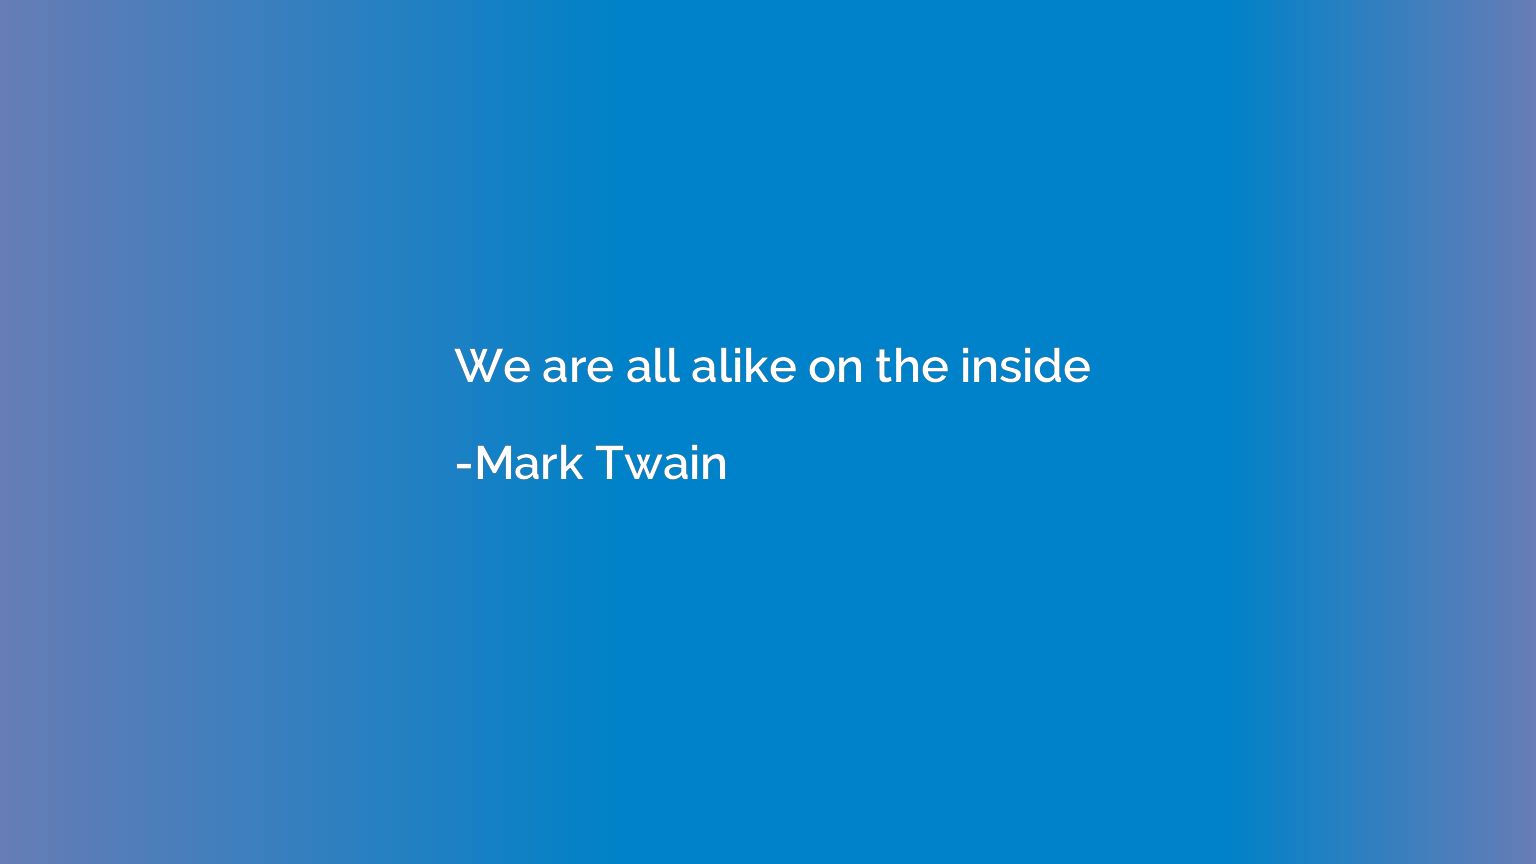 We are all alike on the inside